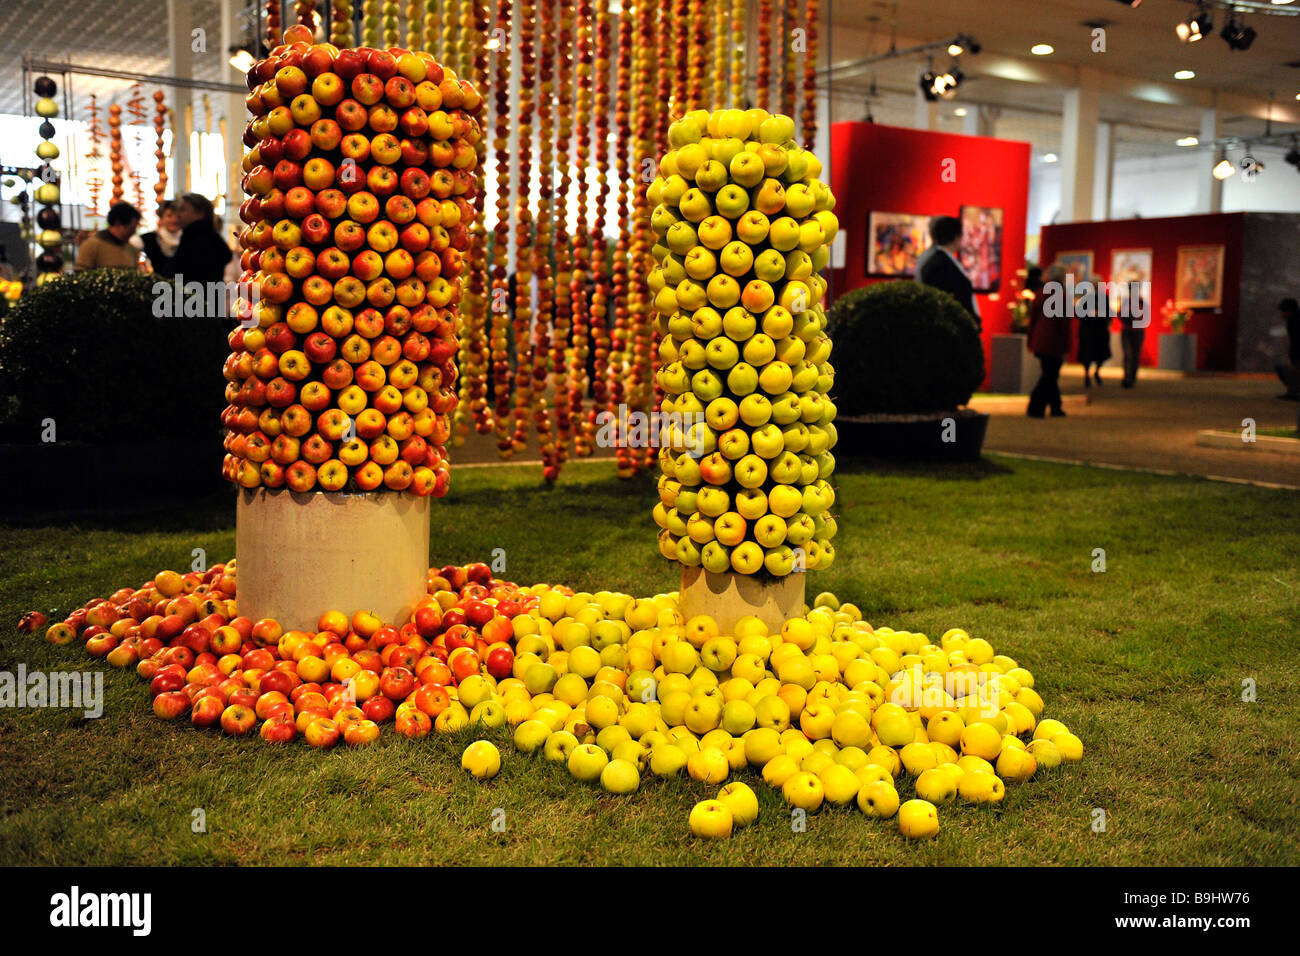 Towers made of apples on an agricultural fair called 'Gruene Woche' in Berlin, Germany, Europe Stock Photo